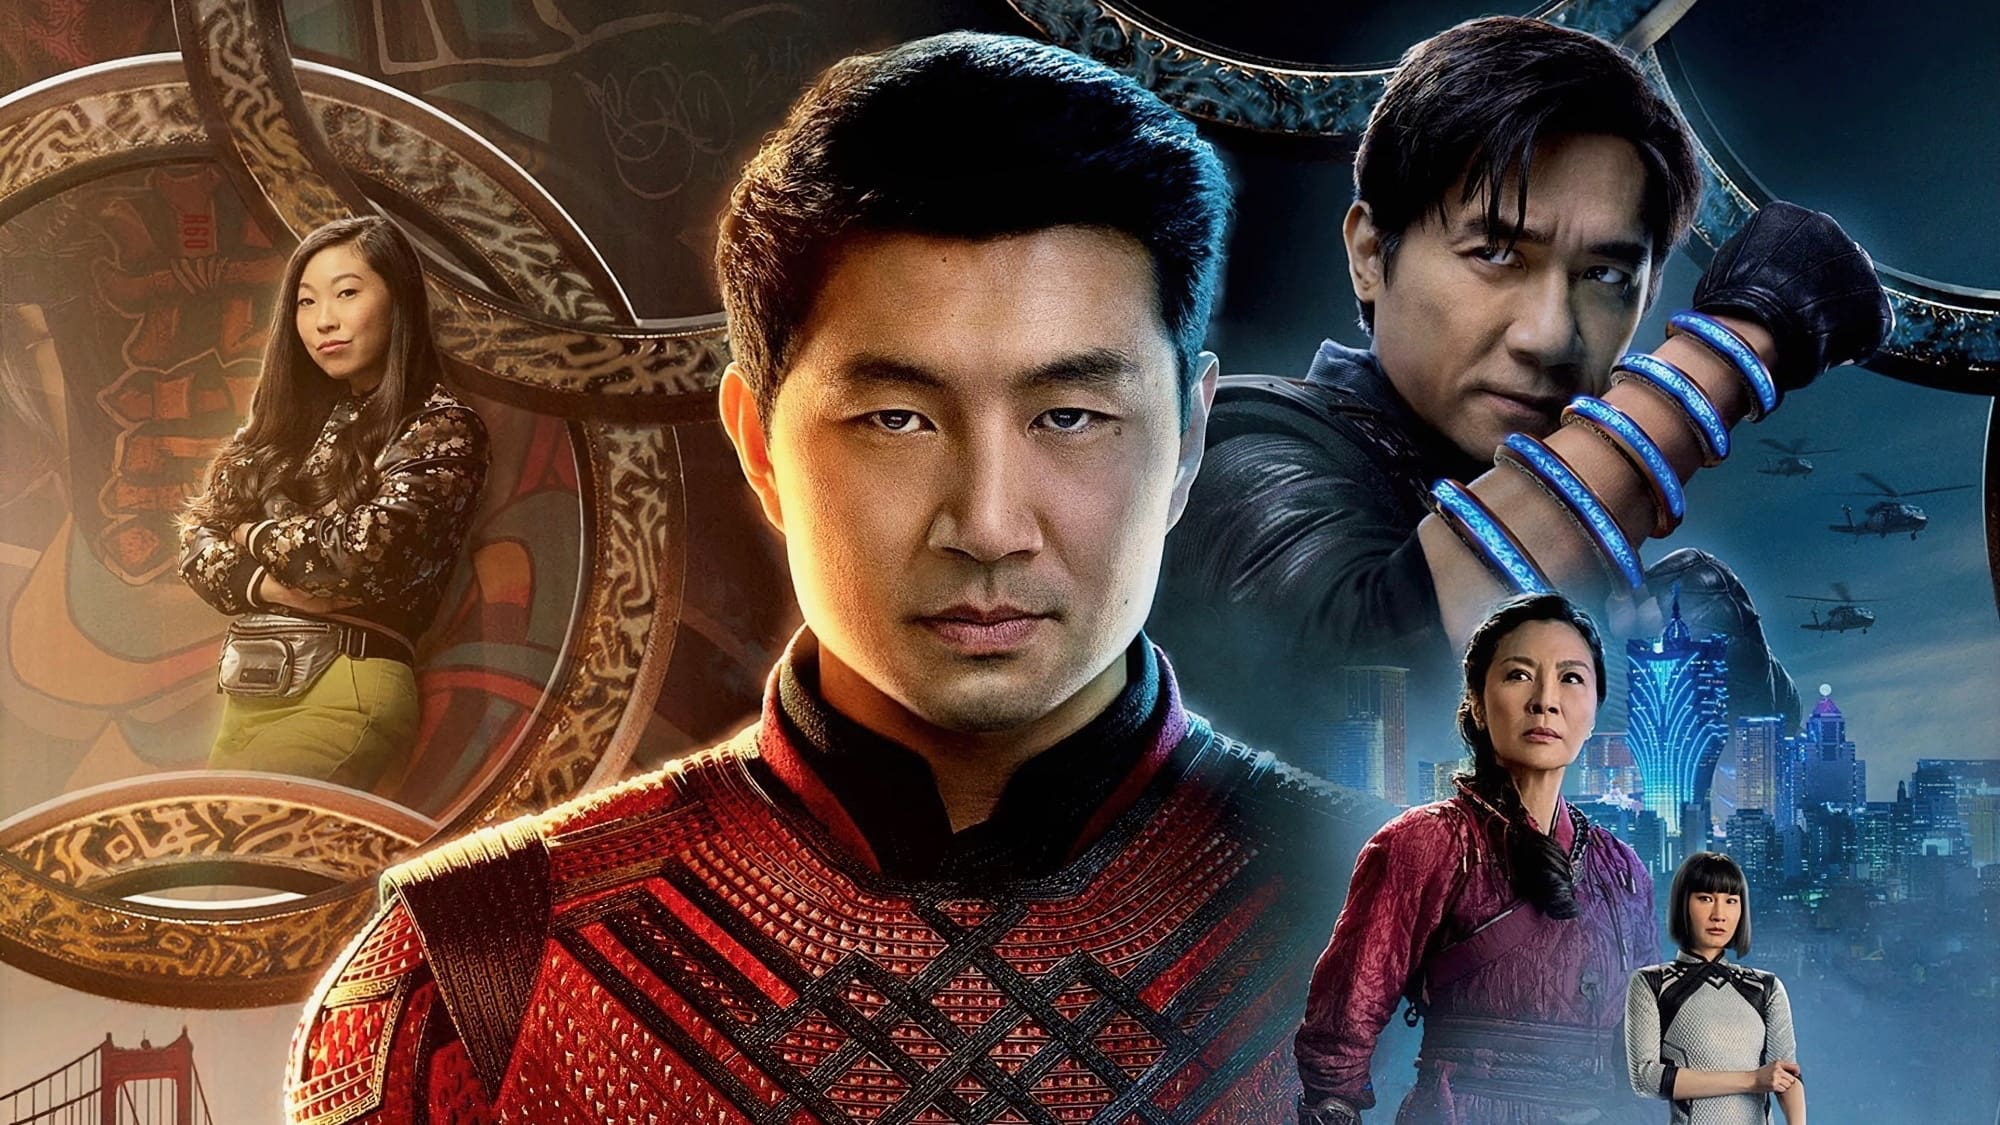 Watch Movie Shang-Chi and the Legend of the Ten Rings 2021 Full Movie Online Free